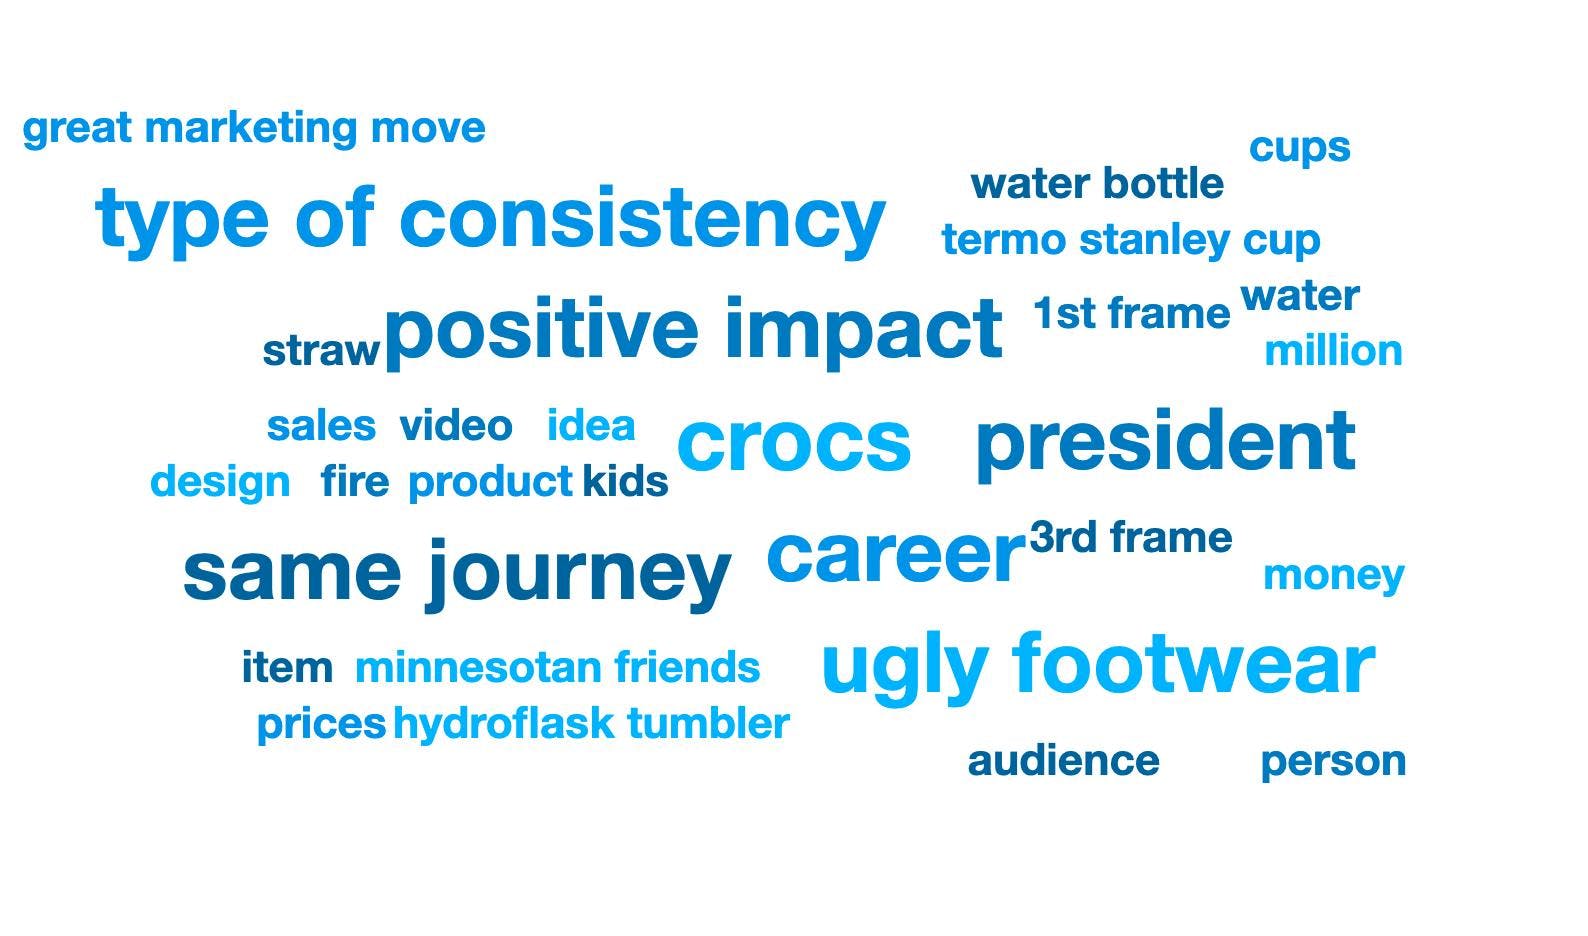 A keyword cloud for the Stanley tumbler conversation on December 28, 2023 with "Crocs" being the main word at the center. Other top keywords include "positive impact", "same journey", "career", "president", and "ugly footwear".